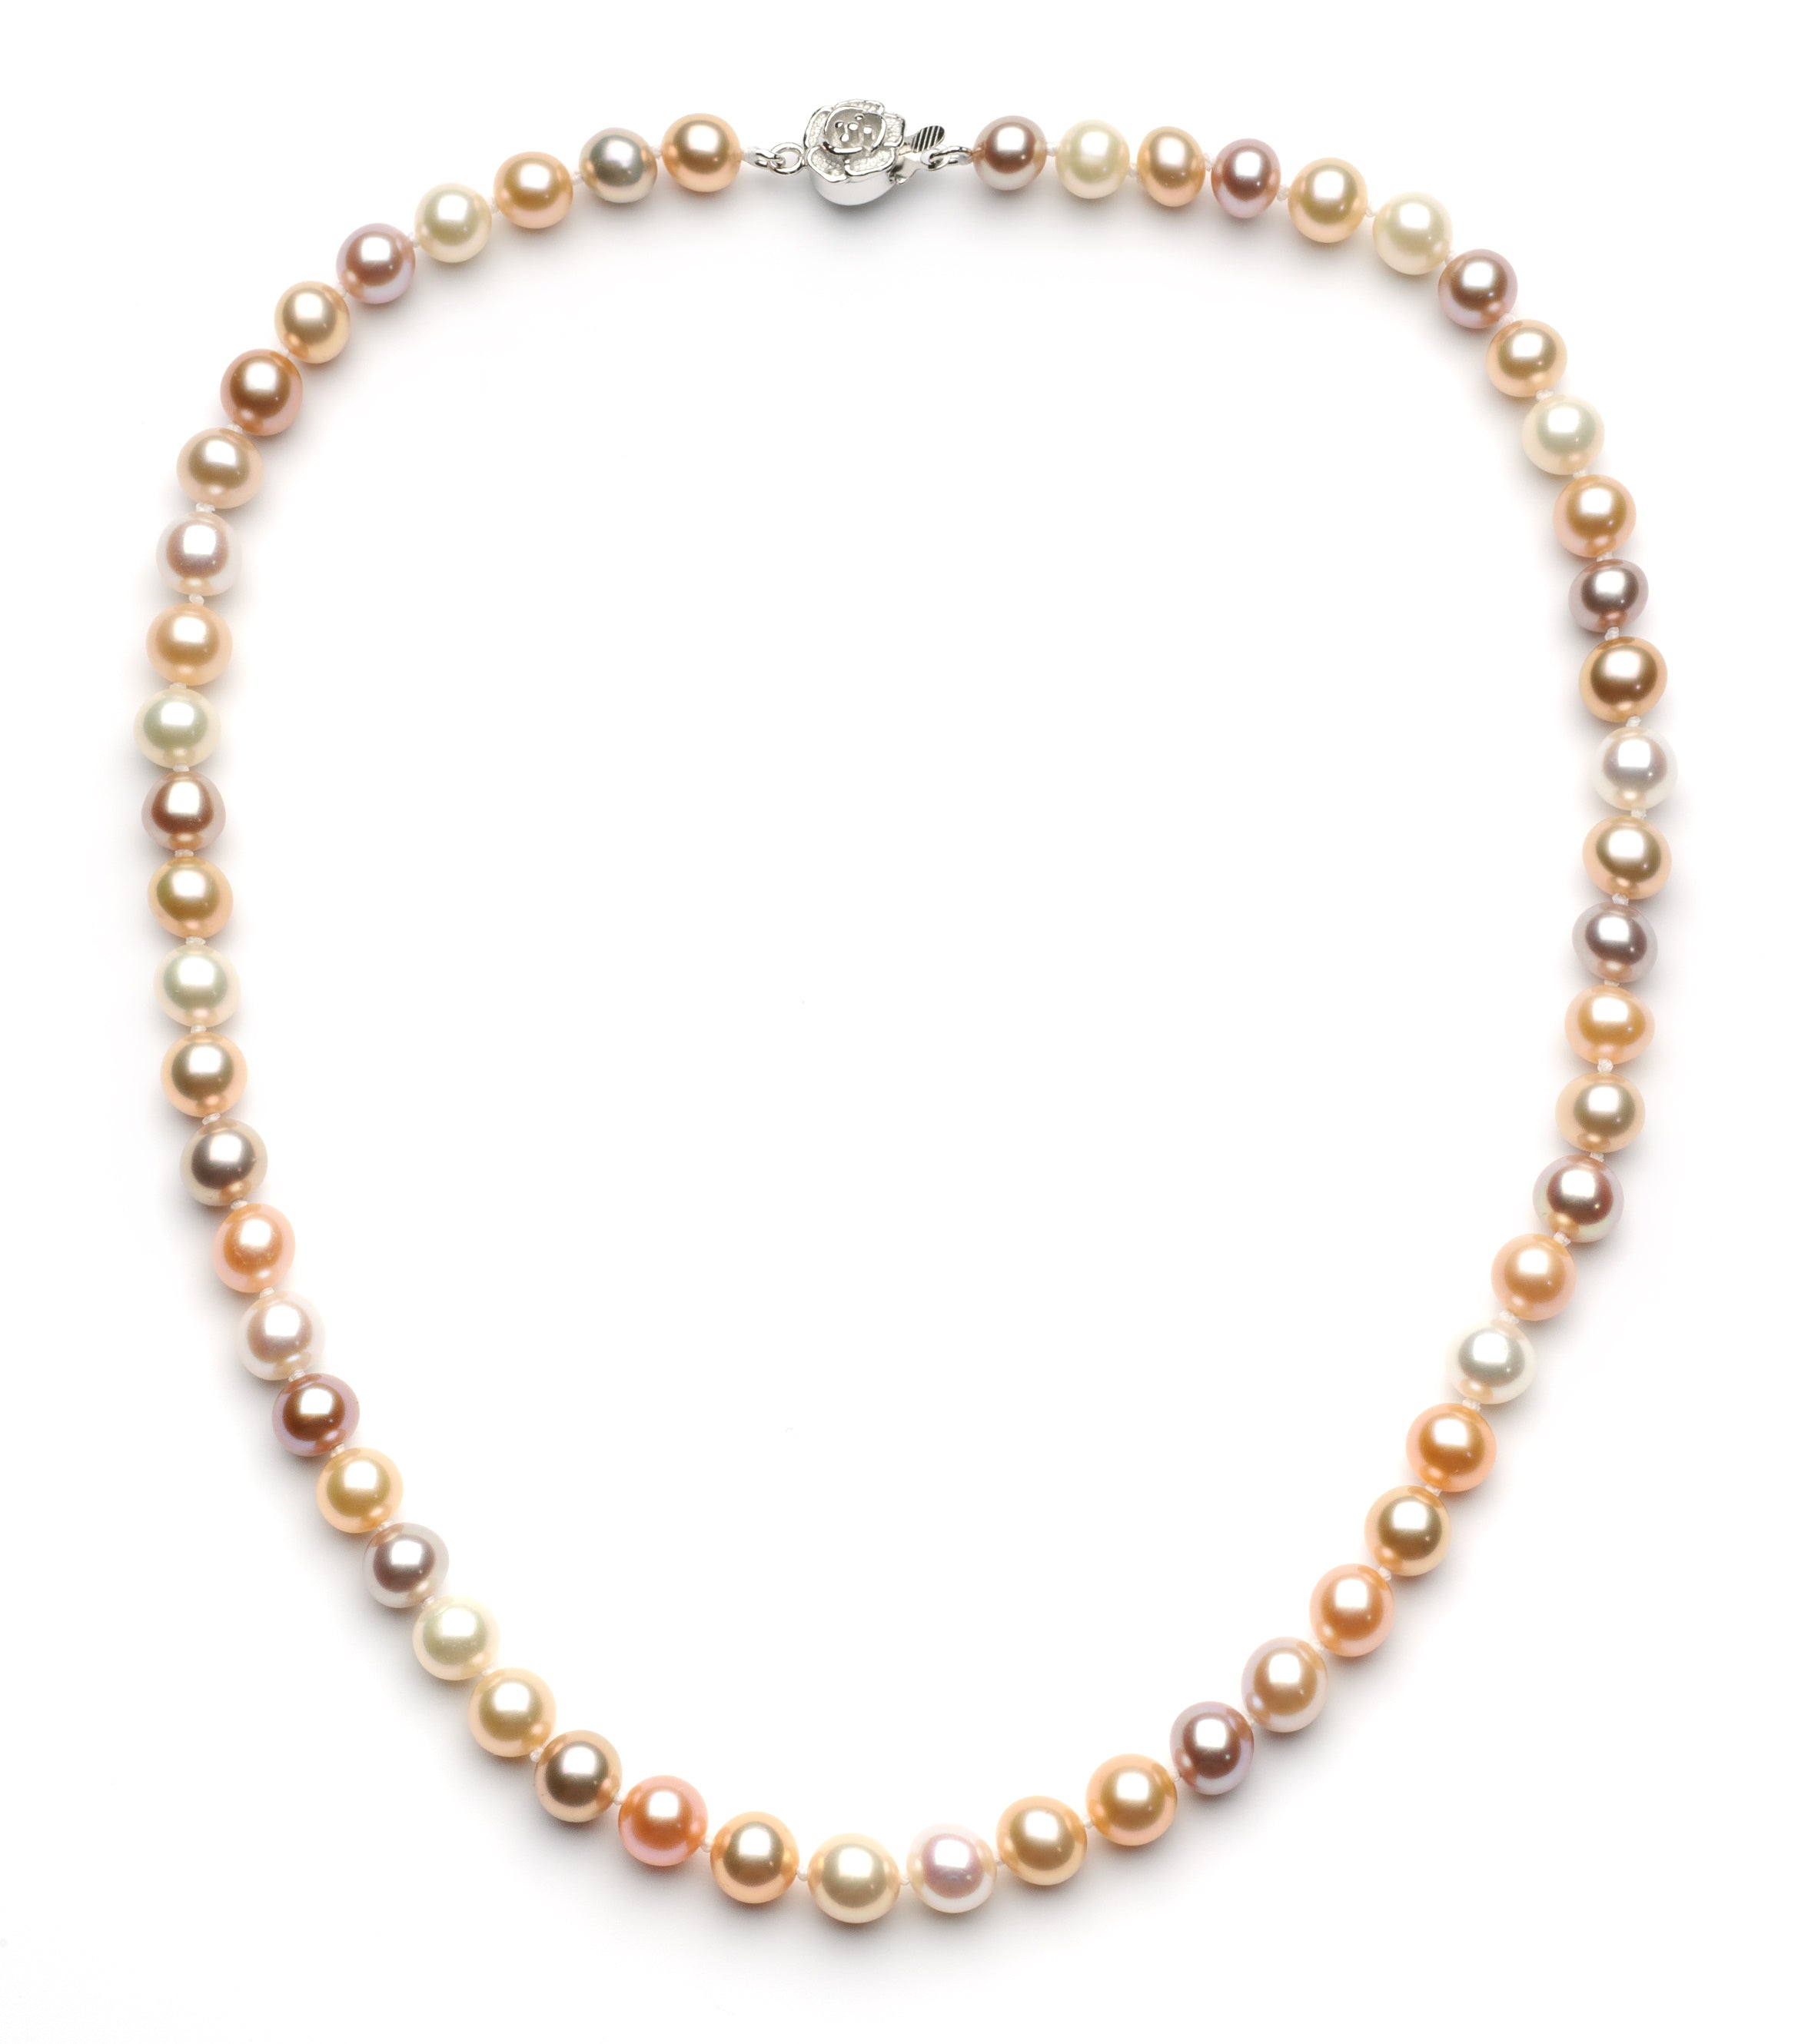 7.0-8.0 mm Multi-color Freshwater Pearl Necklace